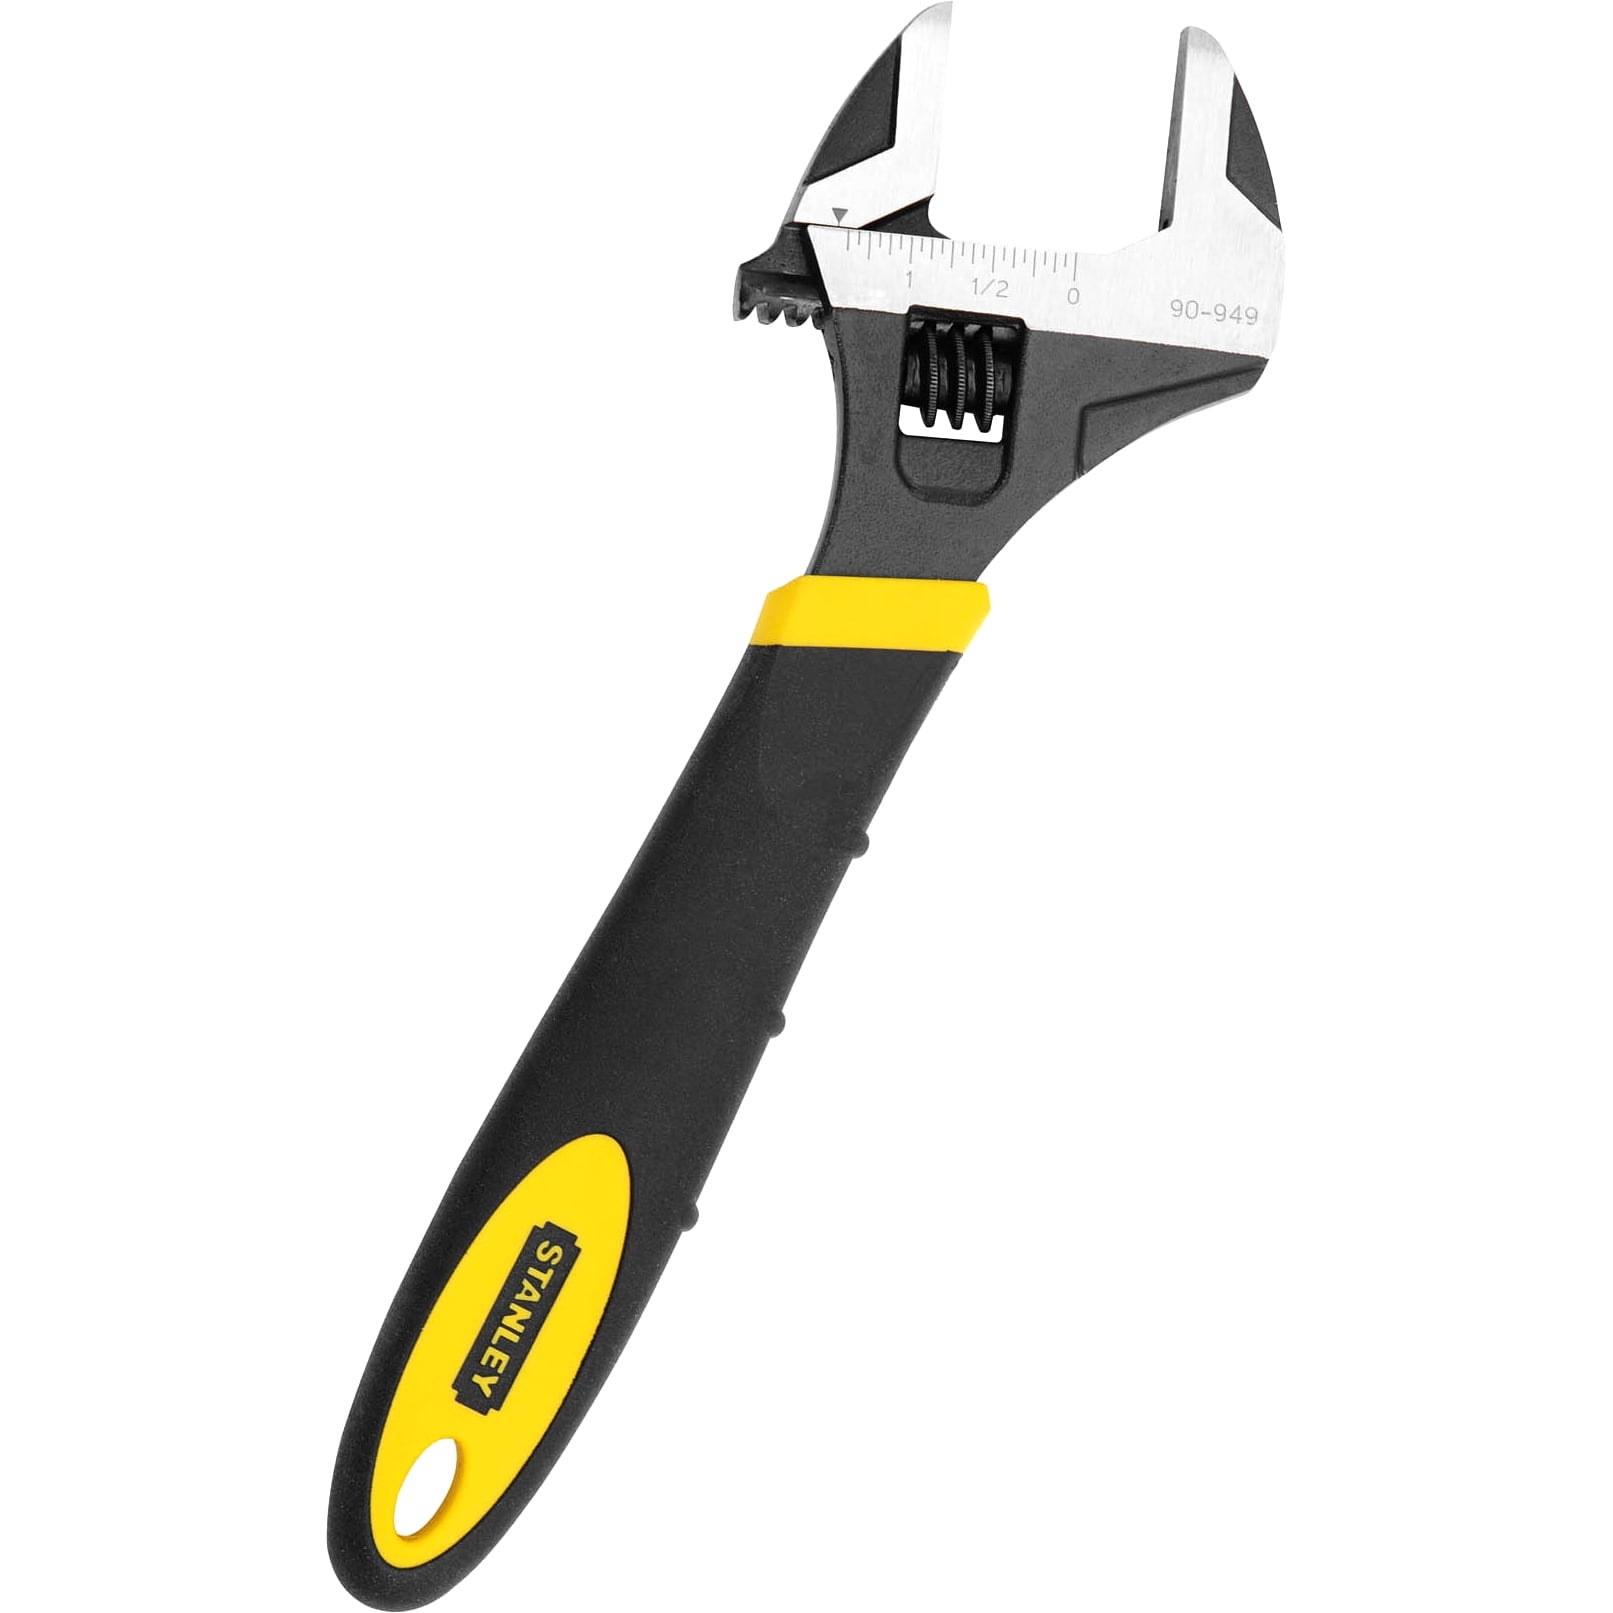 Stanley 90-950 12-inch MaxSteel Adjustable Wrench for sale online 